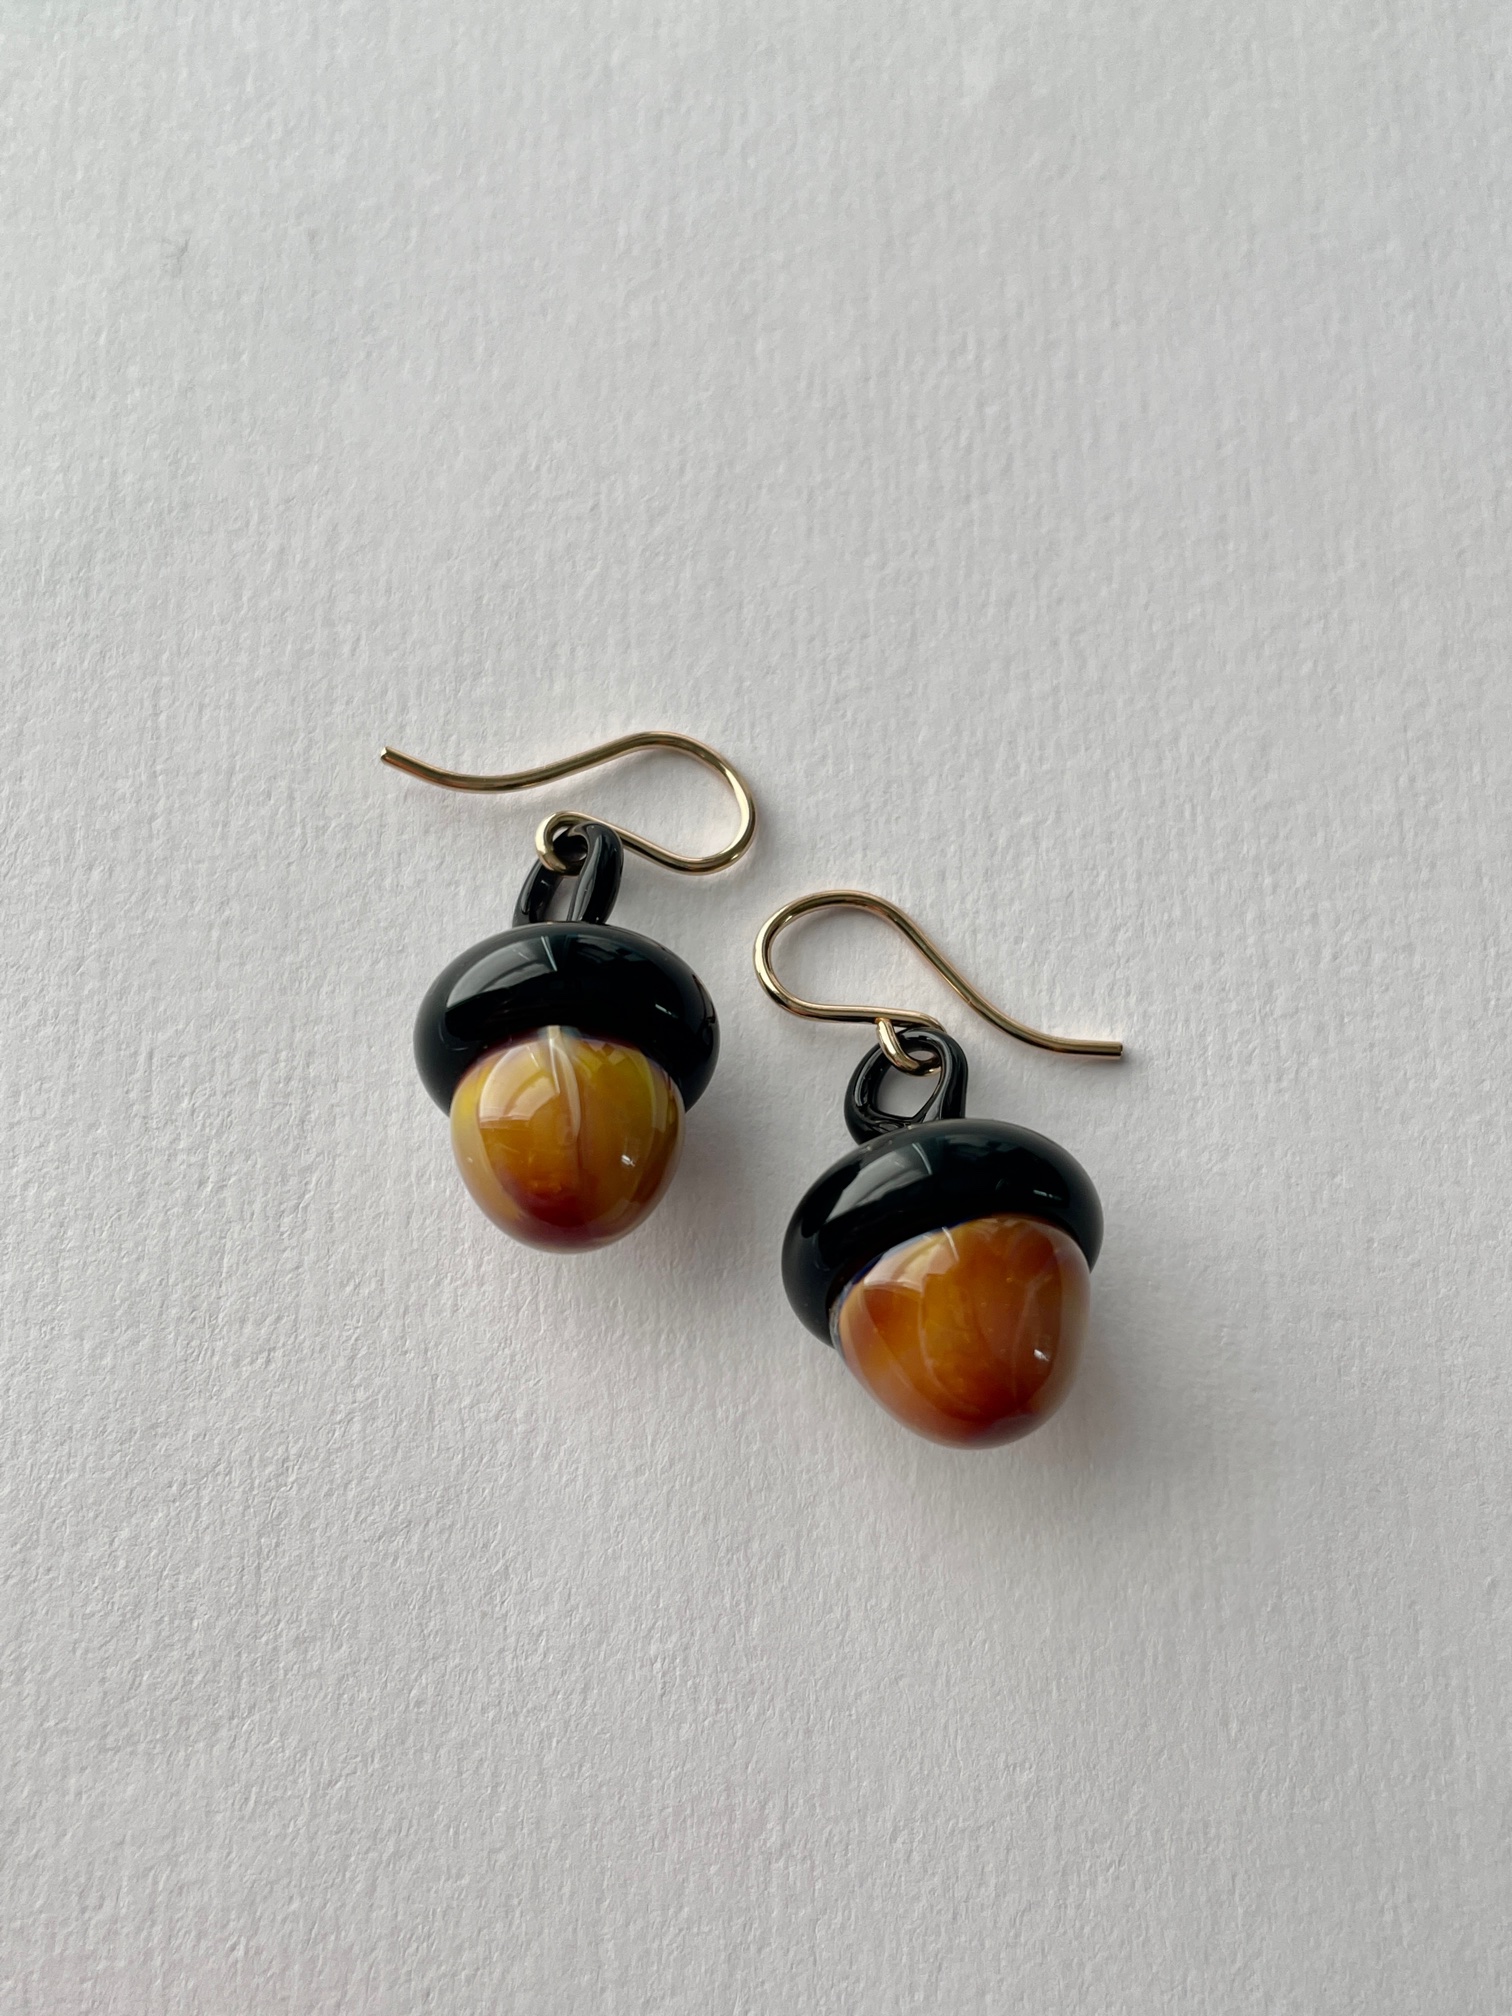 Acorn Earrings with Black Cap on Gold-Filled Wires